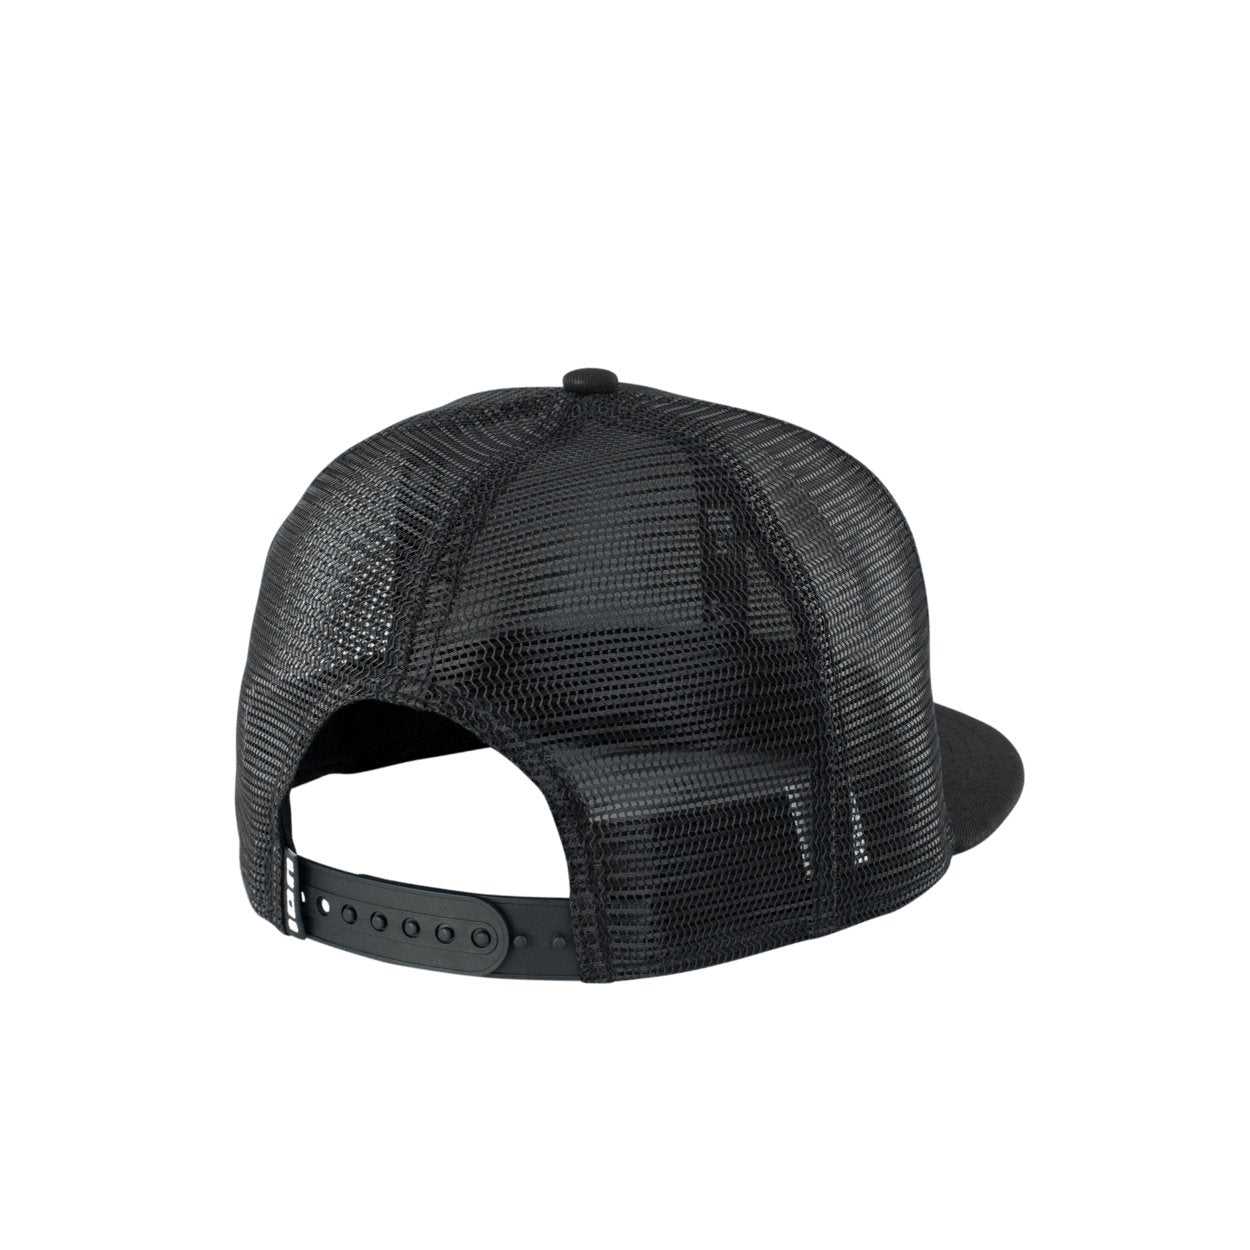 ION Cap Statement 2022 - Worthing Watersports - 9010583034478 - Apparel - ION Bike